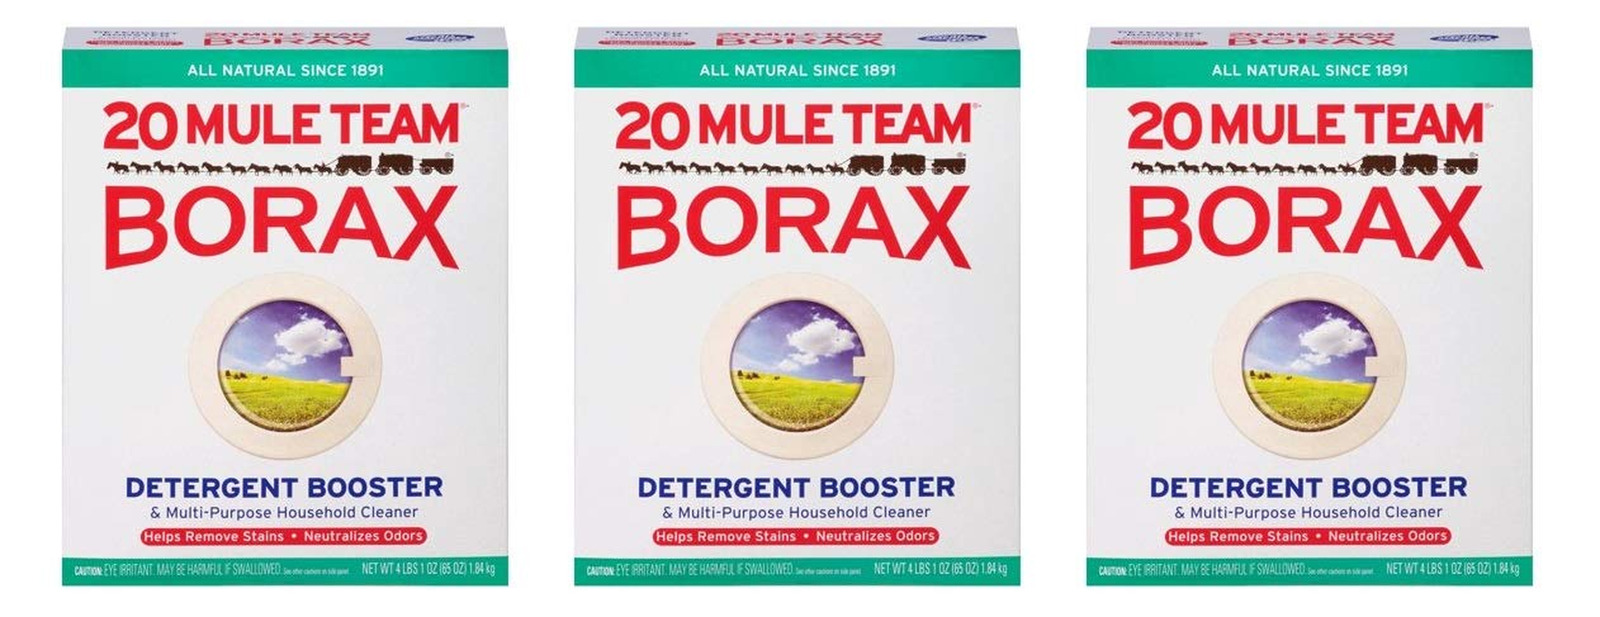 Borax 20 Mule Team Detergent Booster & Multi-Purpose Household Cleaner Box, 65 O